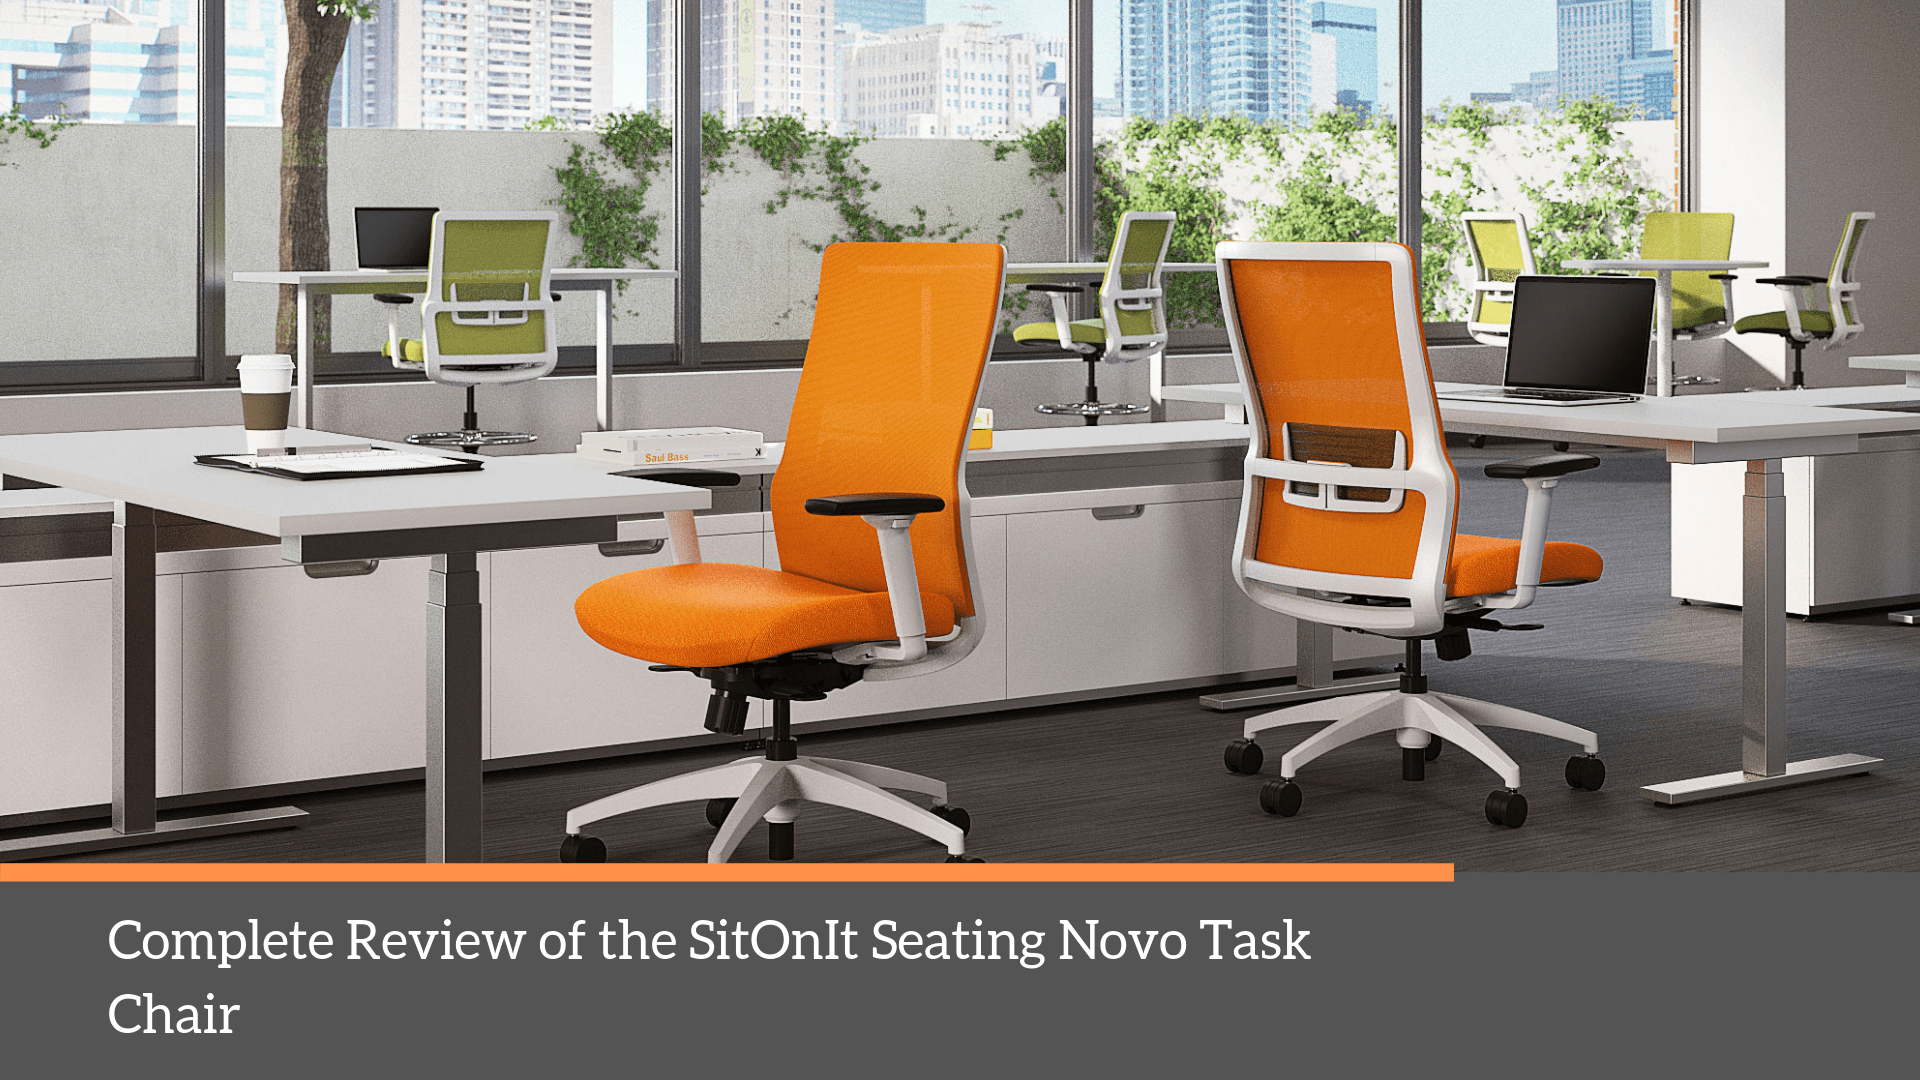 https://www.officeinteriors.ca/wp-content/uploads/2018/12/Complete-Review-of-the-SitOnIt-Seating-Novo-Task-Chair.png